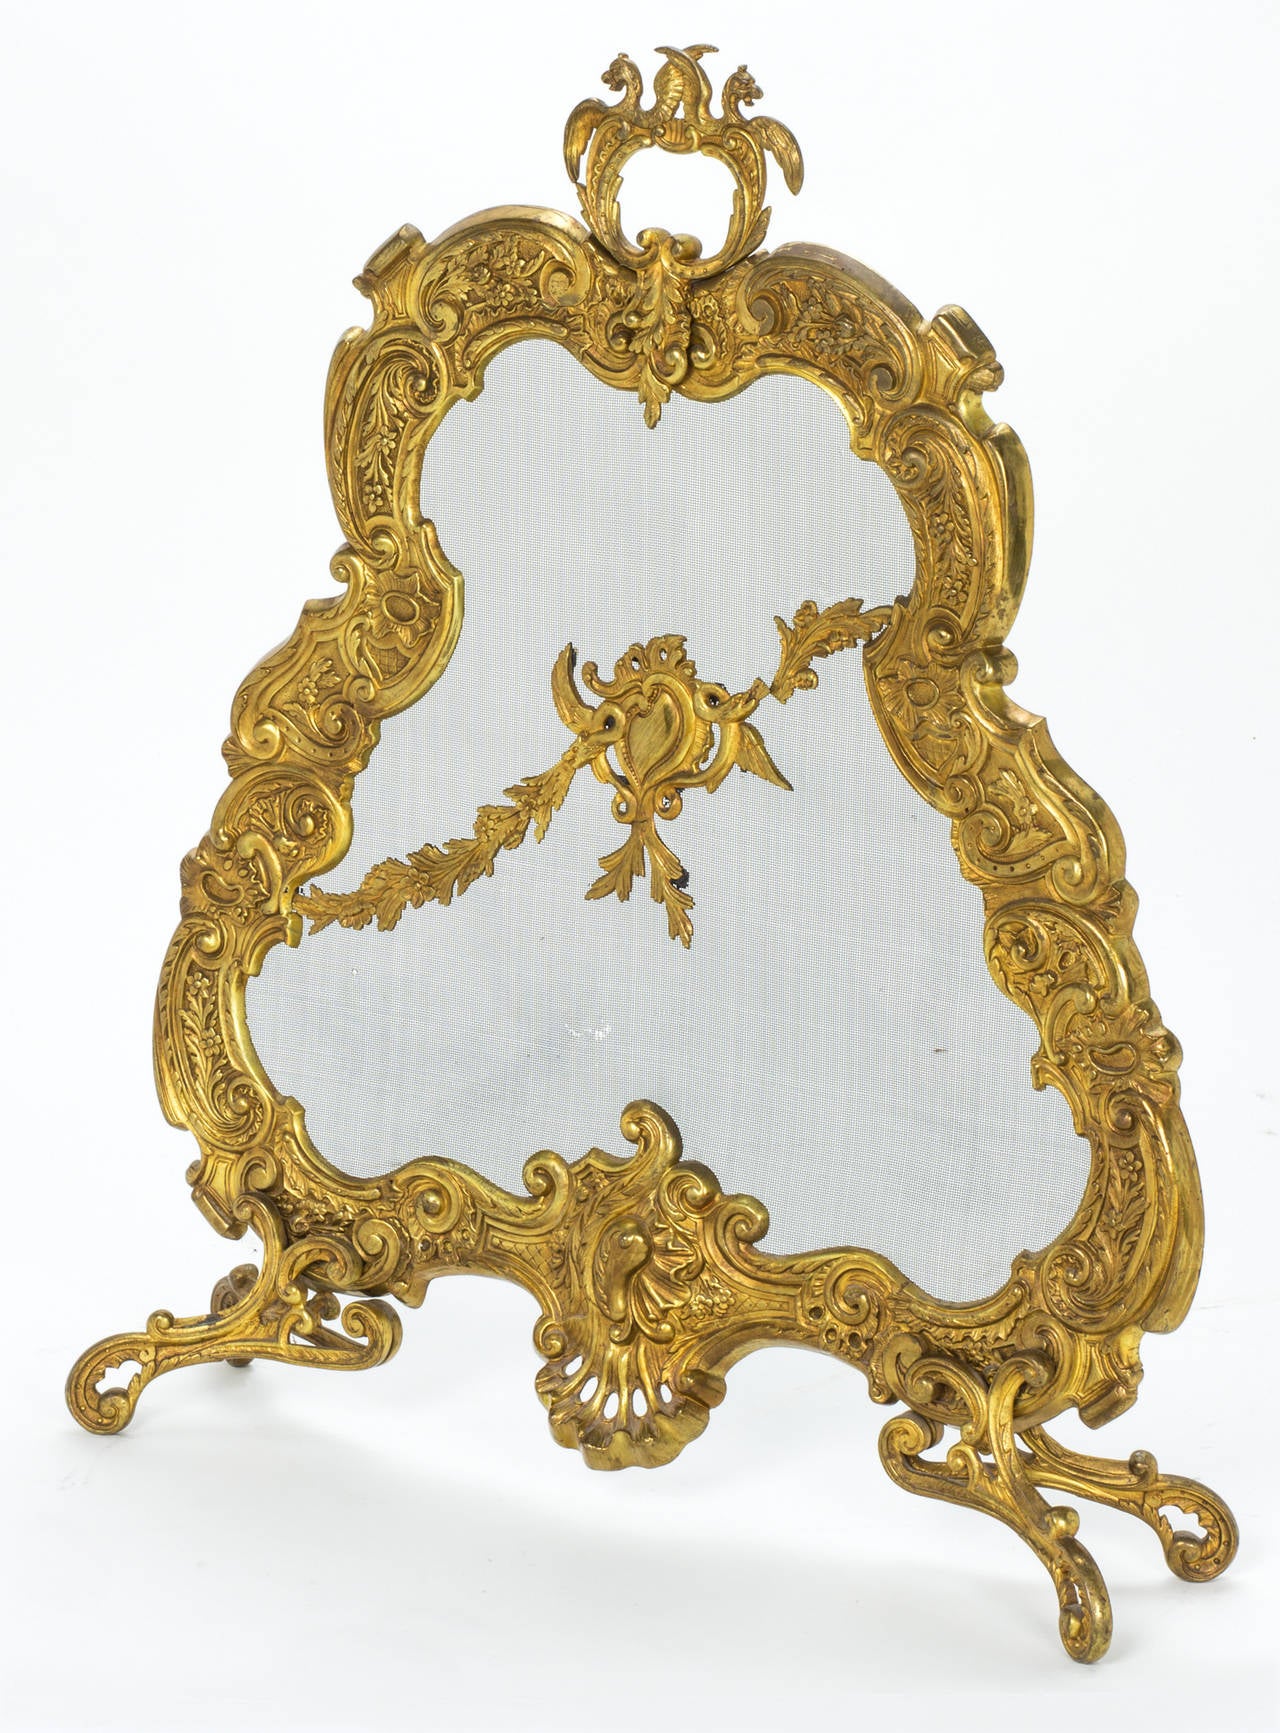 C. 1860s French gilt bronze fire screen.   Wonderful cast workmanship of flowing floral motif with small winged dragons at the top for handle. There is a small tear in the lower center part of the screen, which does not detract from the quality of